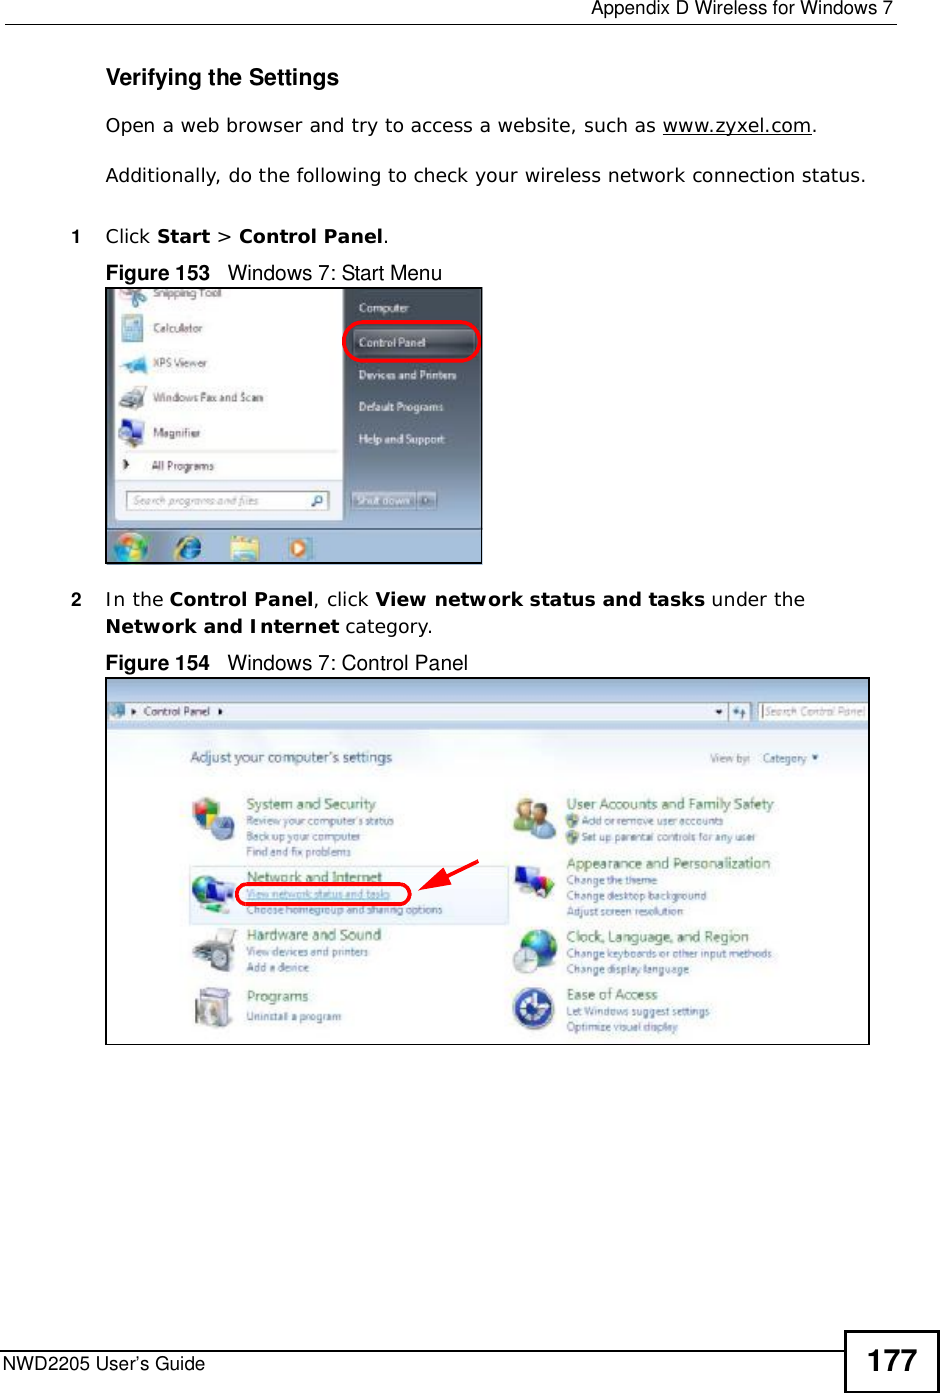  Appendix DWireless for Windows 7NWD2205 User’s Guide 177Verifying the SettingsOpen a web browser and try to access a website, such as www.zyxel.com. Additionally, do the following to check your wireless network connection status.1Click Start &gt; Control Panel.Figure 153   Windows 7: Start Menu2In the Control Panel, click View network status and tasks under the Network and Internet category.Figure 154   Windows 7: Control Panel